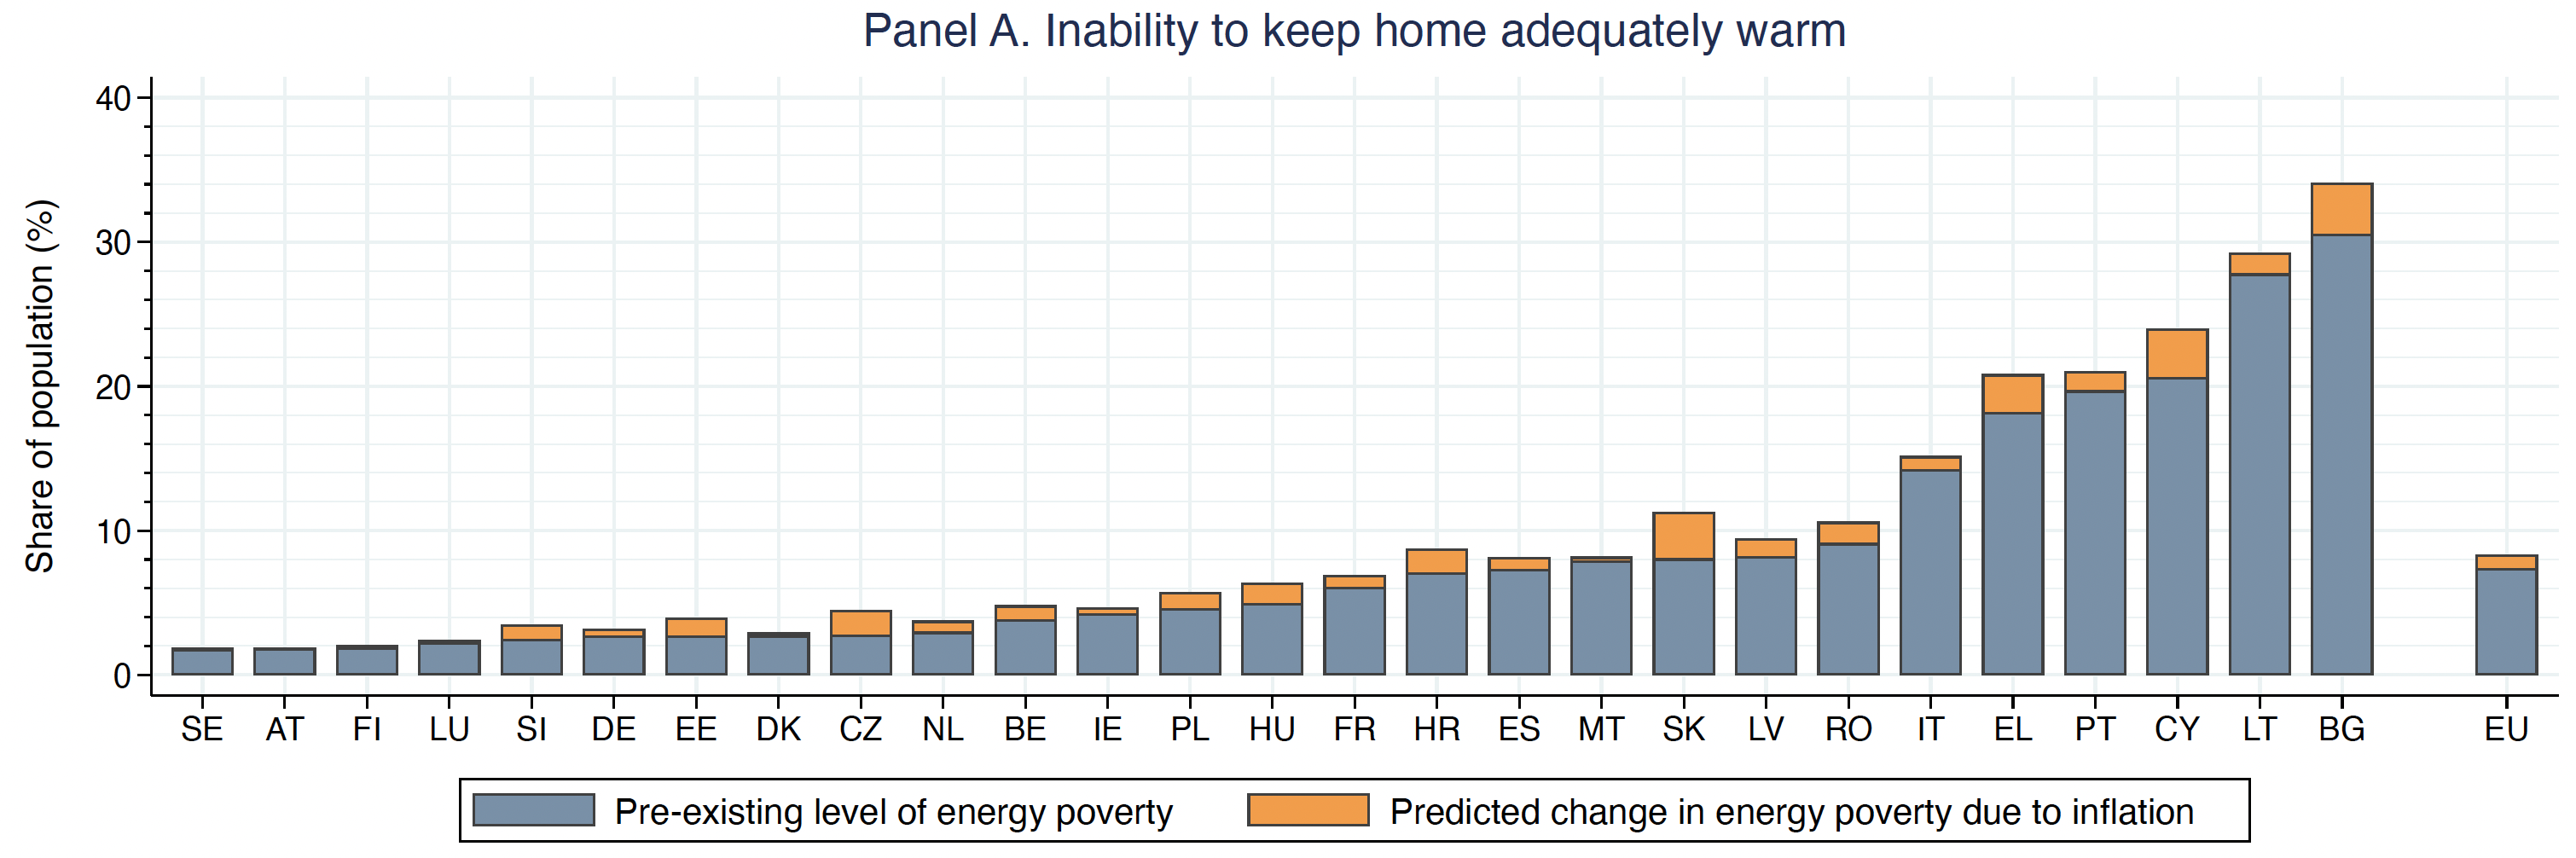 Figure 3a The predicted change in energy poverty indicators due to inflation across the EU